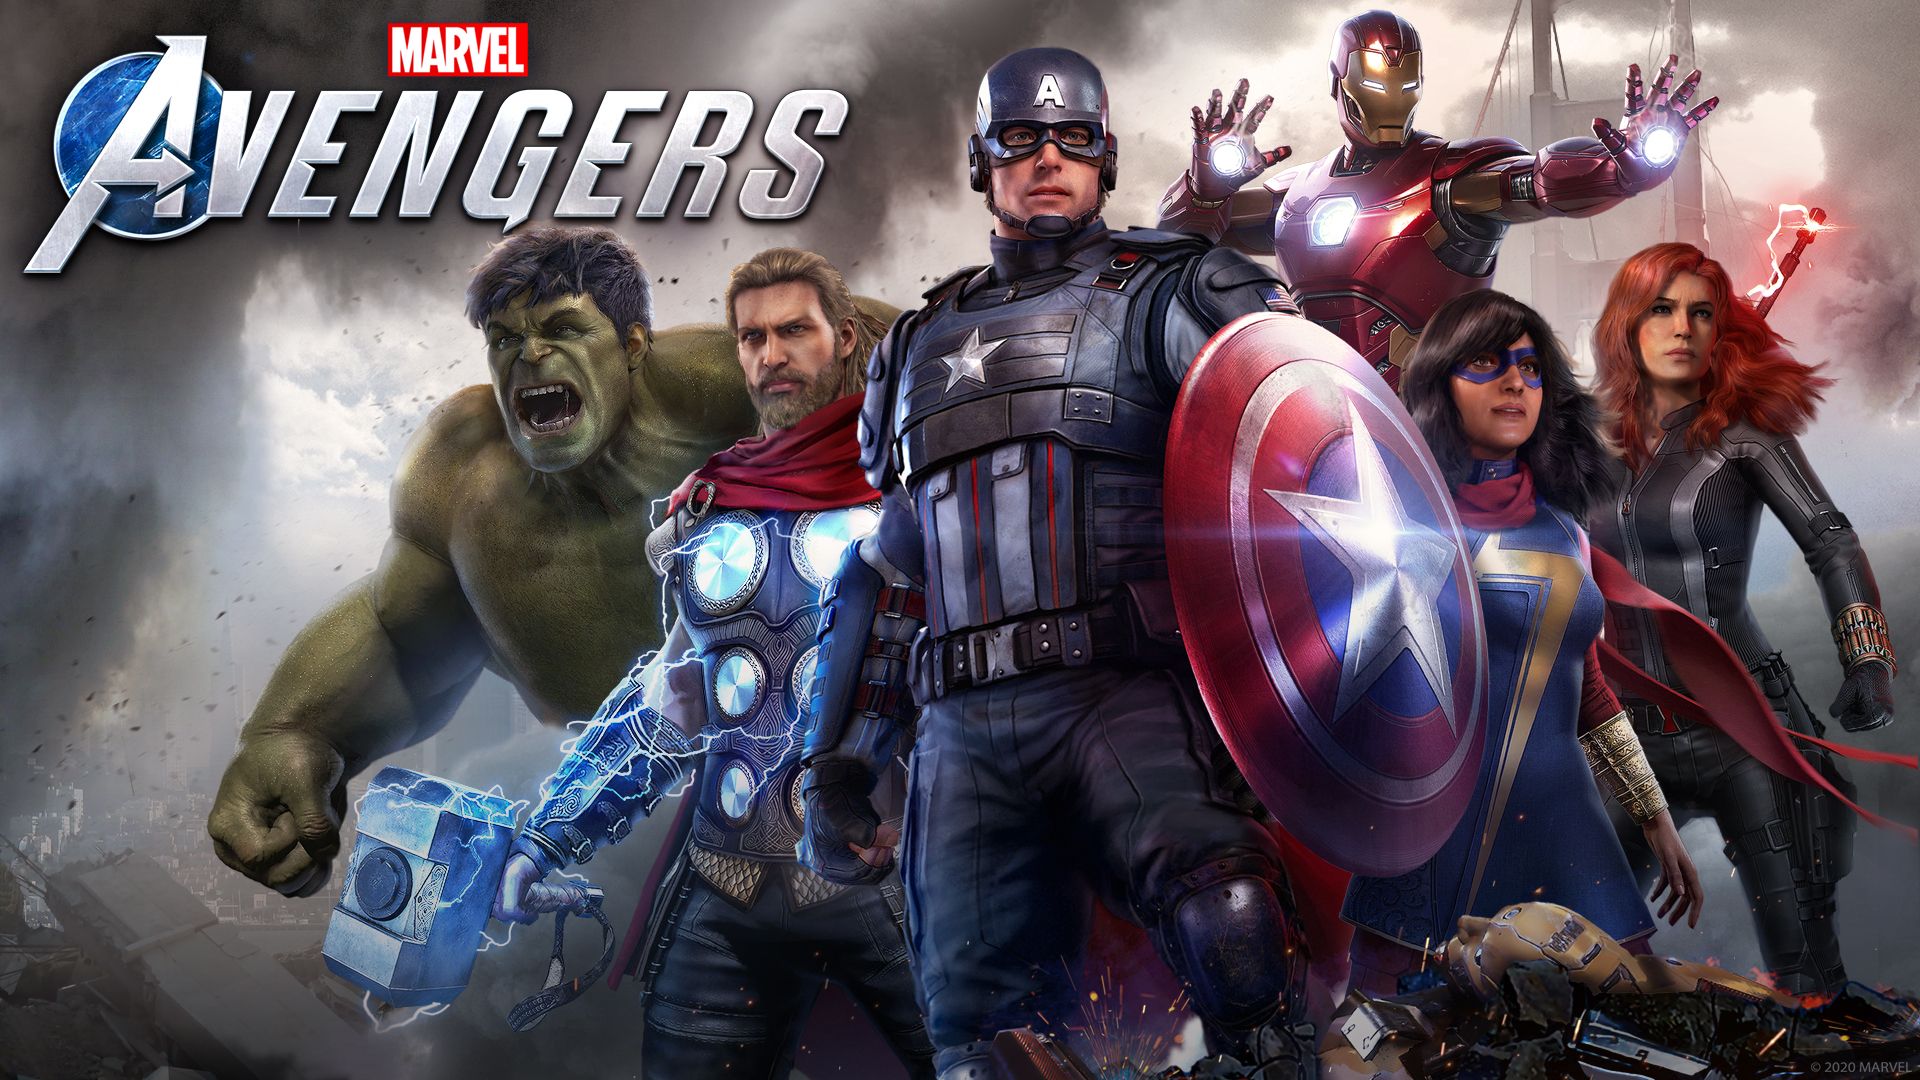 Marvel's Avengers Video Game Wallpaper, HD Games 4K Wallpaper, Image, Photo and Background